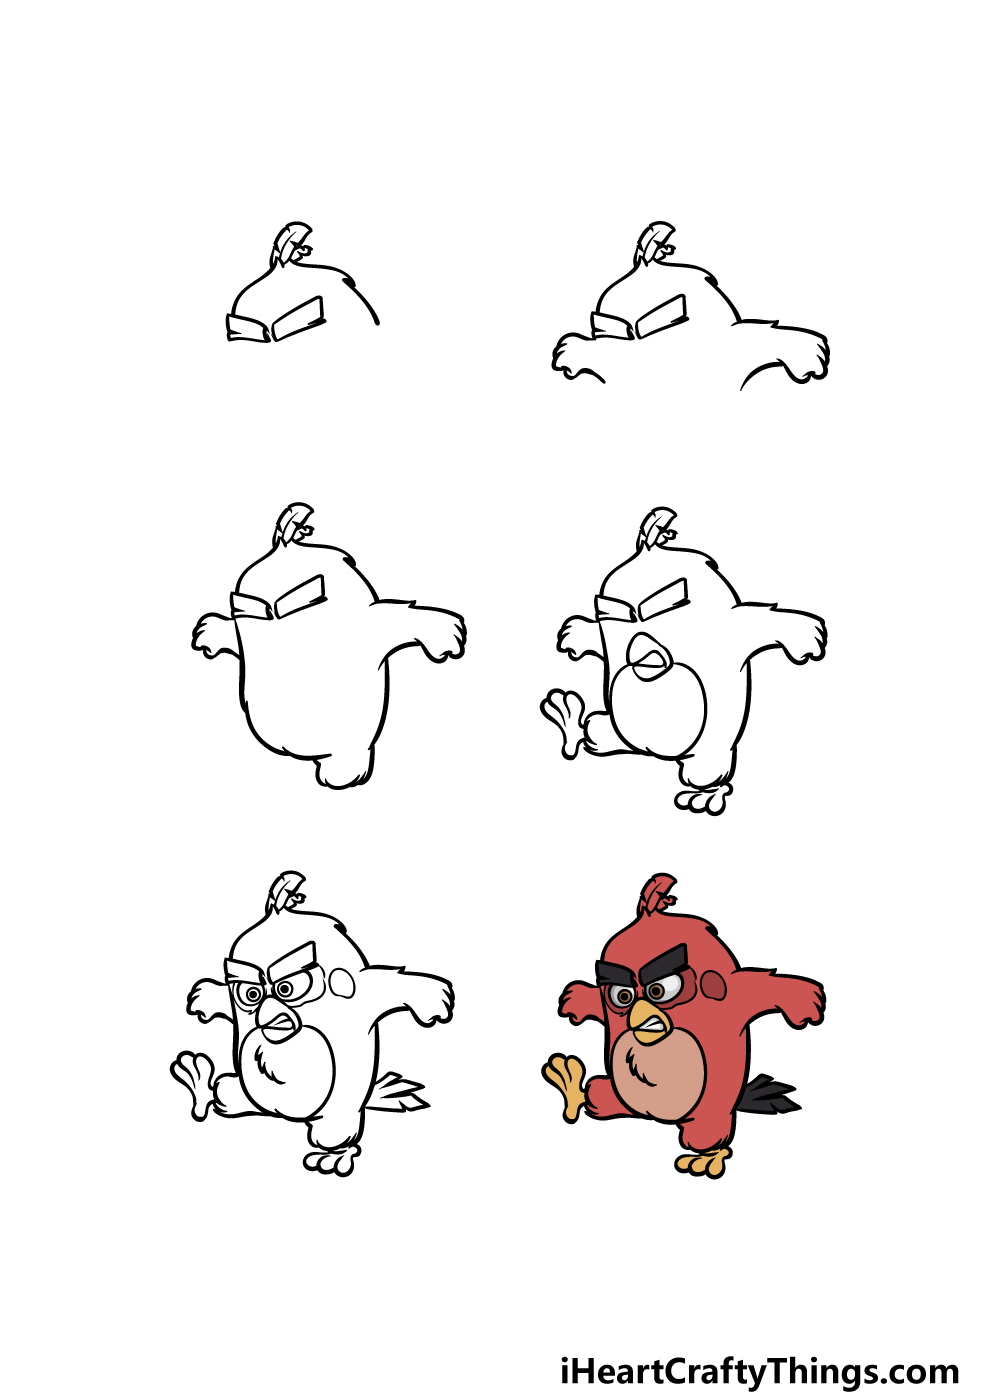 how to draw Angry Bird in 6 steps